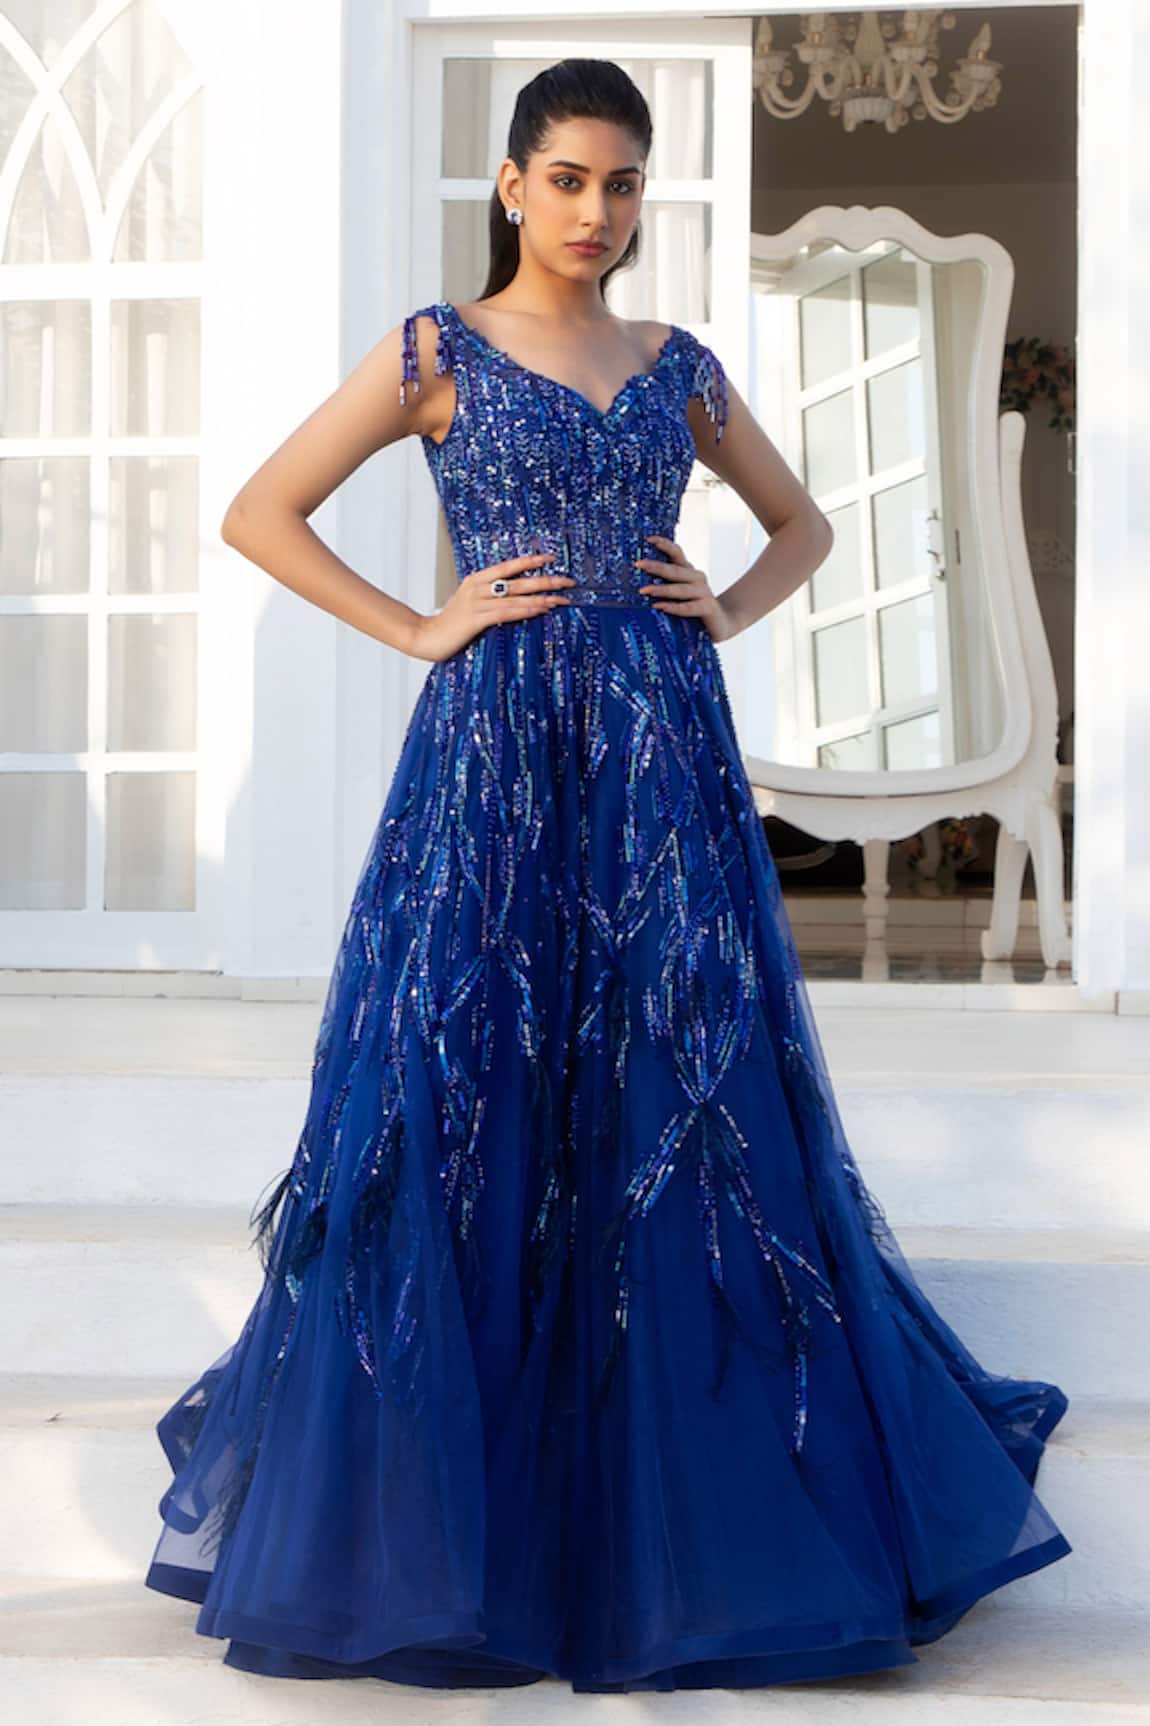 Jiya by Veer Design Studio Sequin & Bead Embroidered Gown